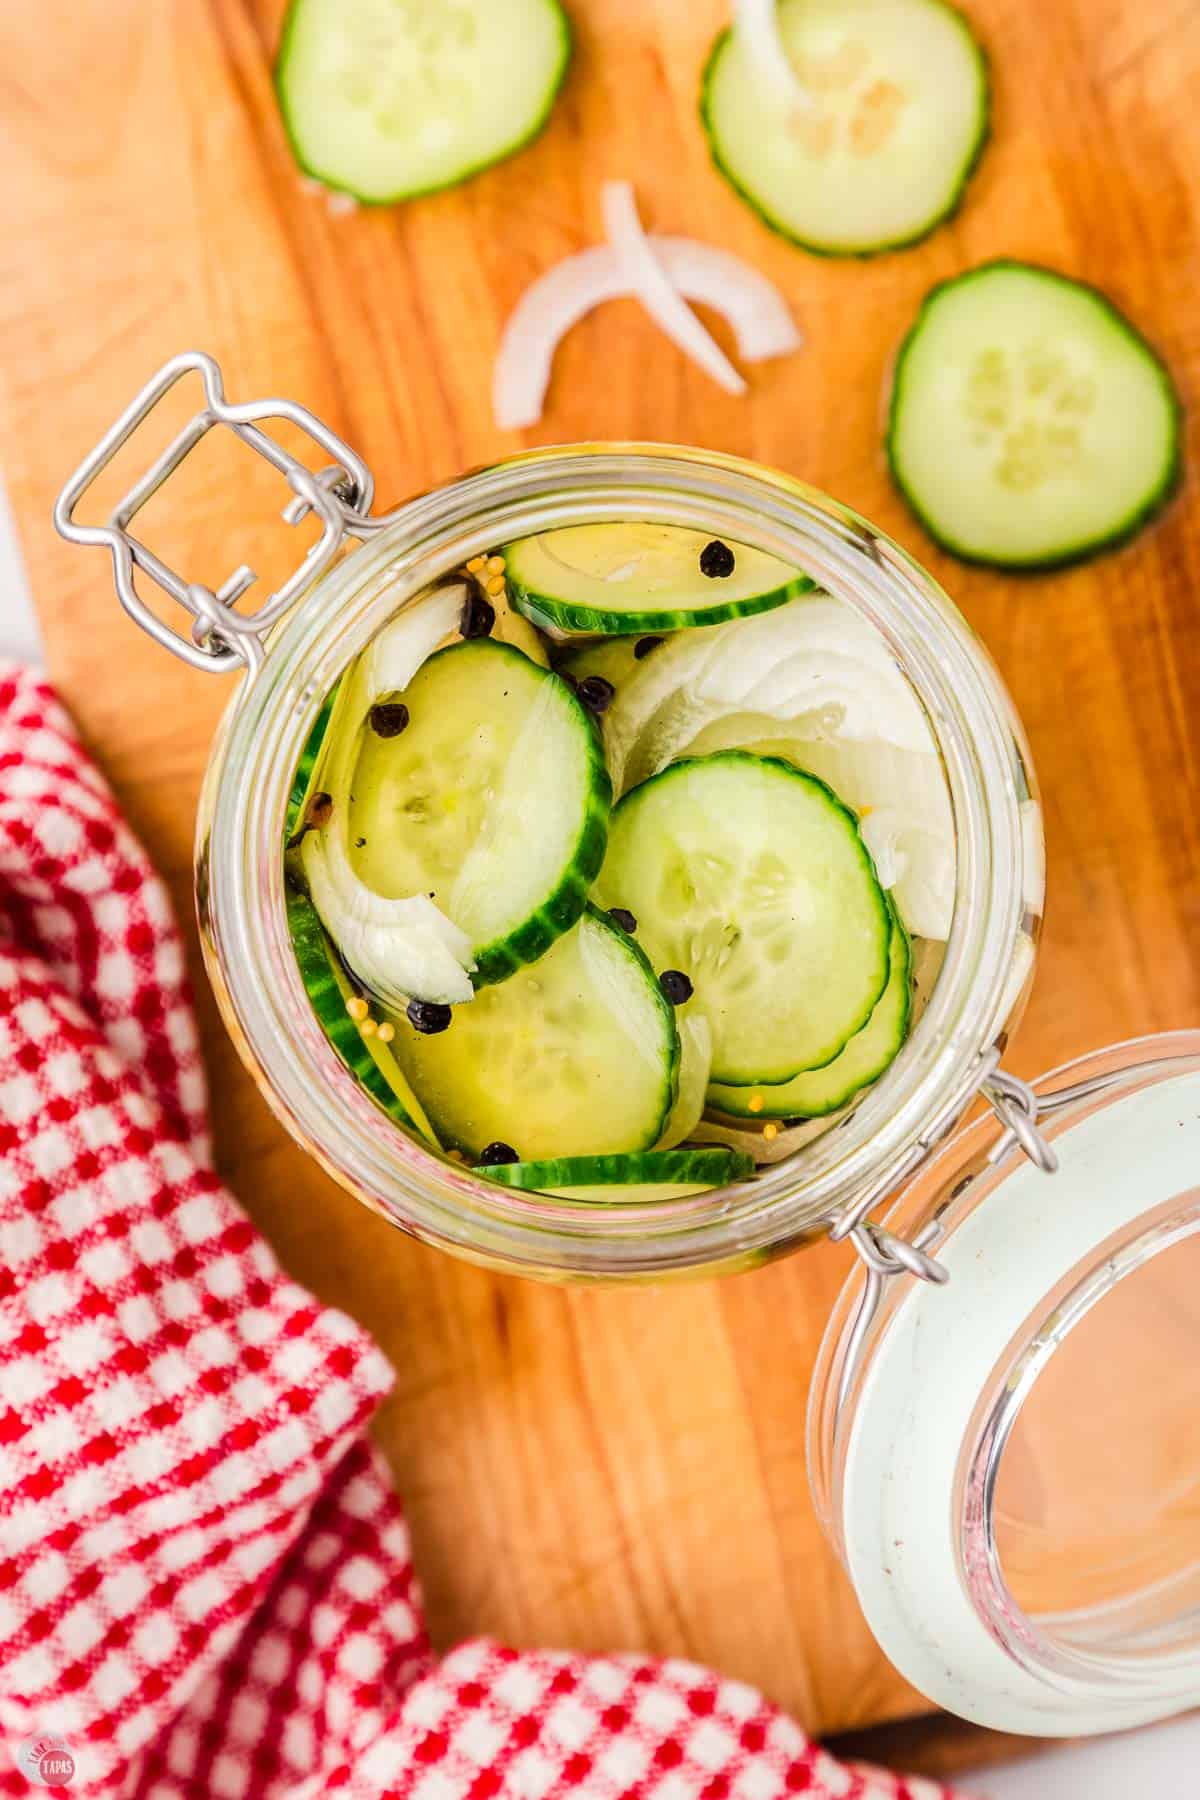 the best pickles are fresh made and stored in the fridge to get really cold